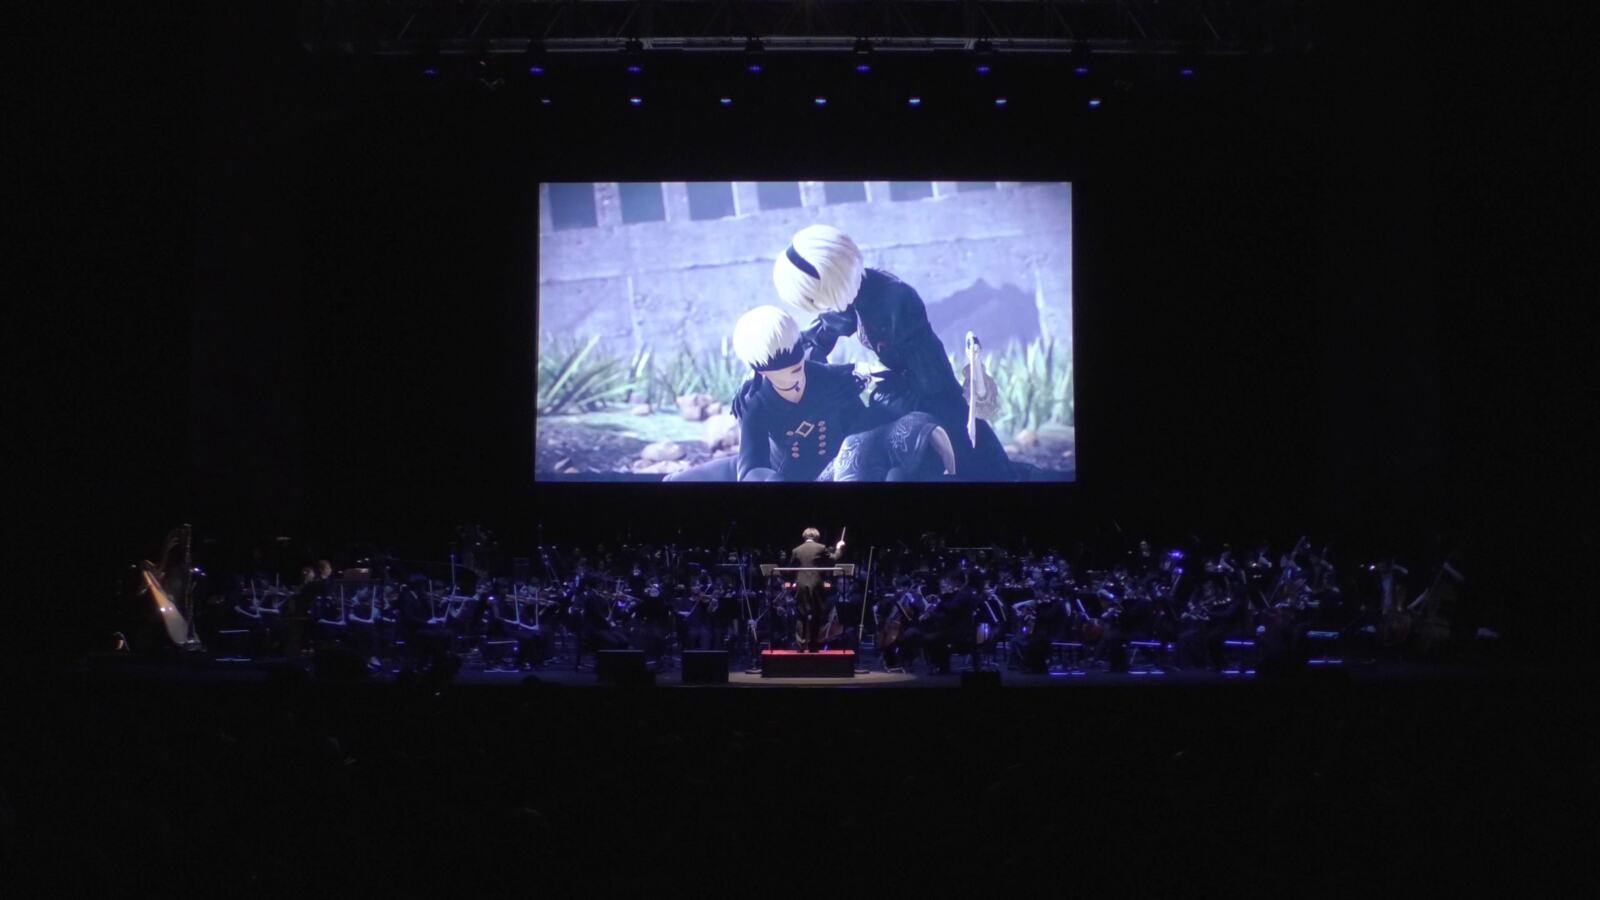 NieR orchestra on stage